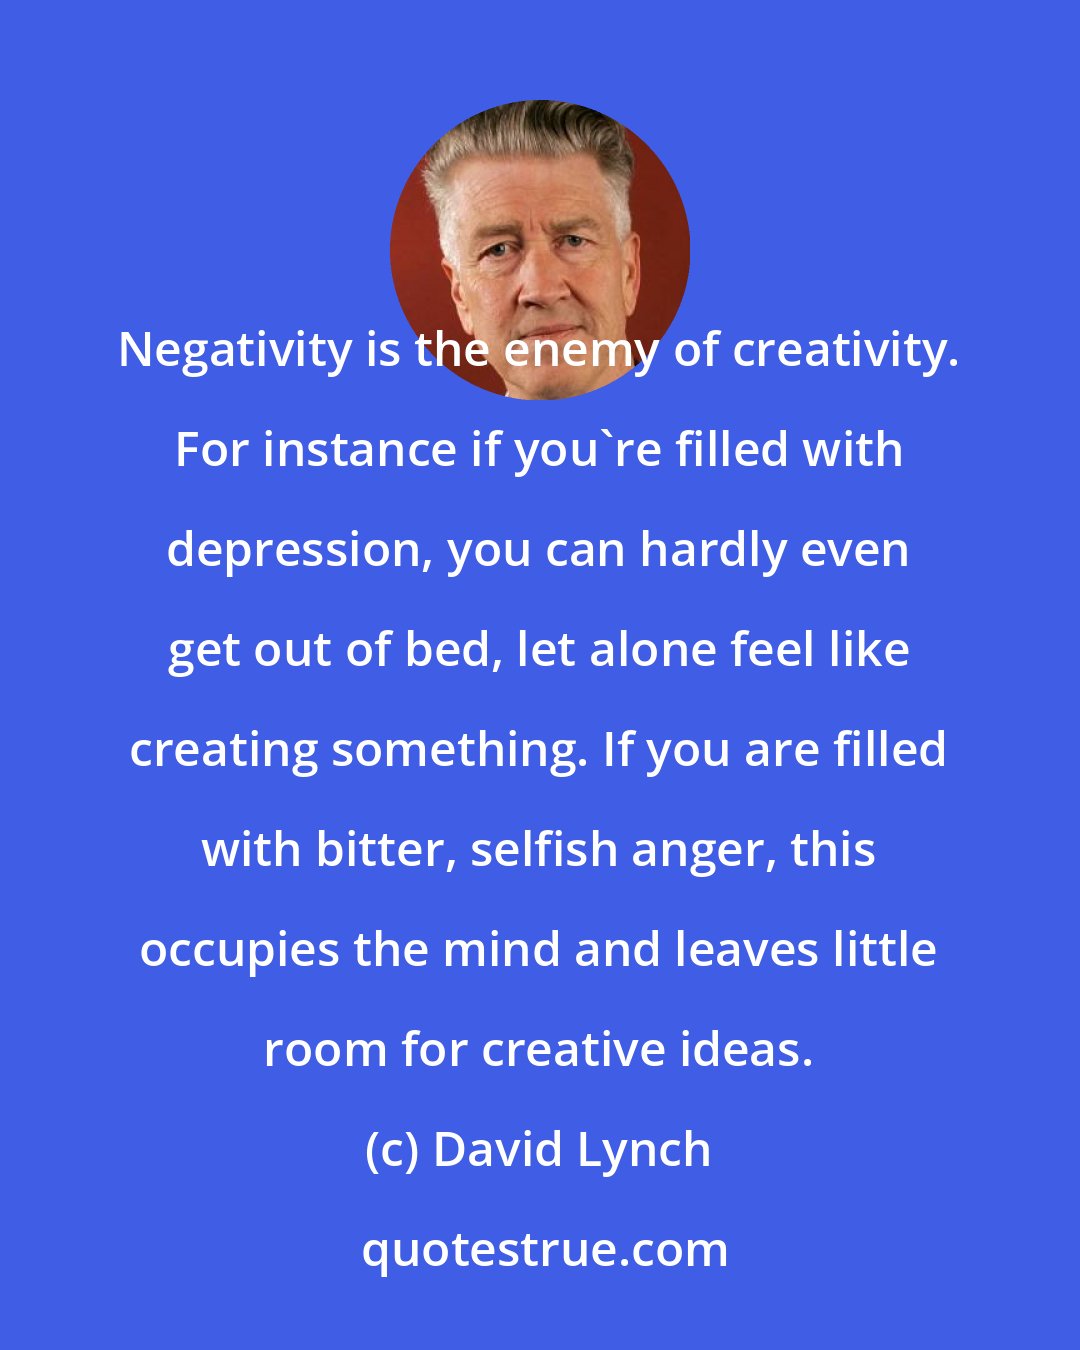 David Lynch: Negativity is the enemy of creativity. For instance if you're filled with depression, you can hardly even get out of bed, let alone feel like creating something. If you are filled with bitter, selfish anger, this occupies the mind and leaves little room for creative ideas.